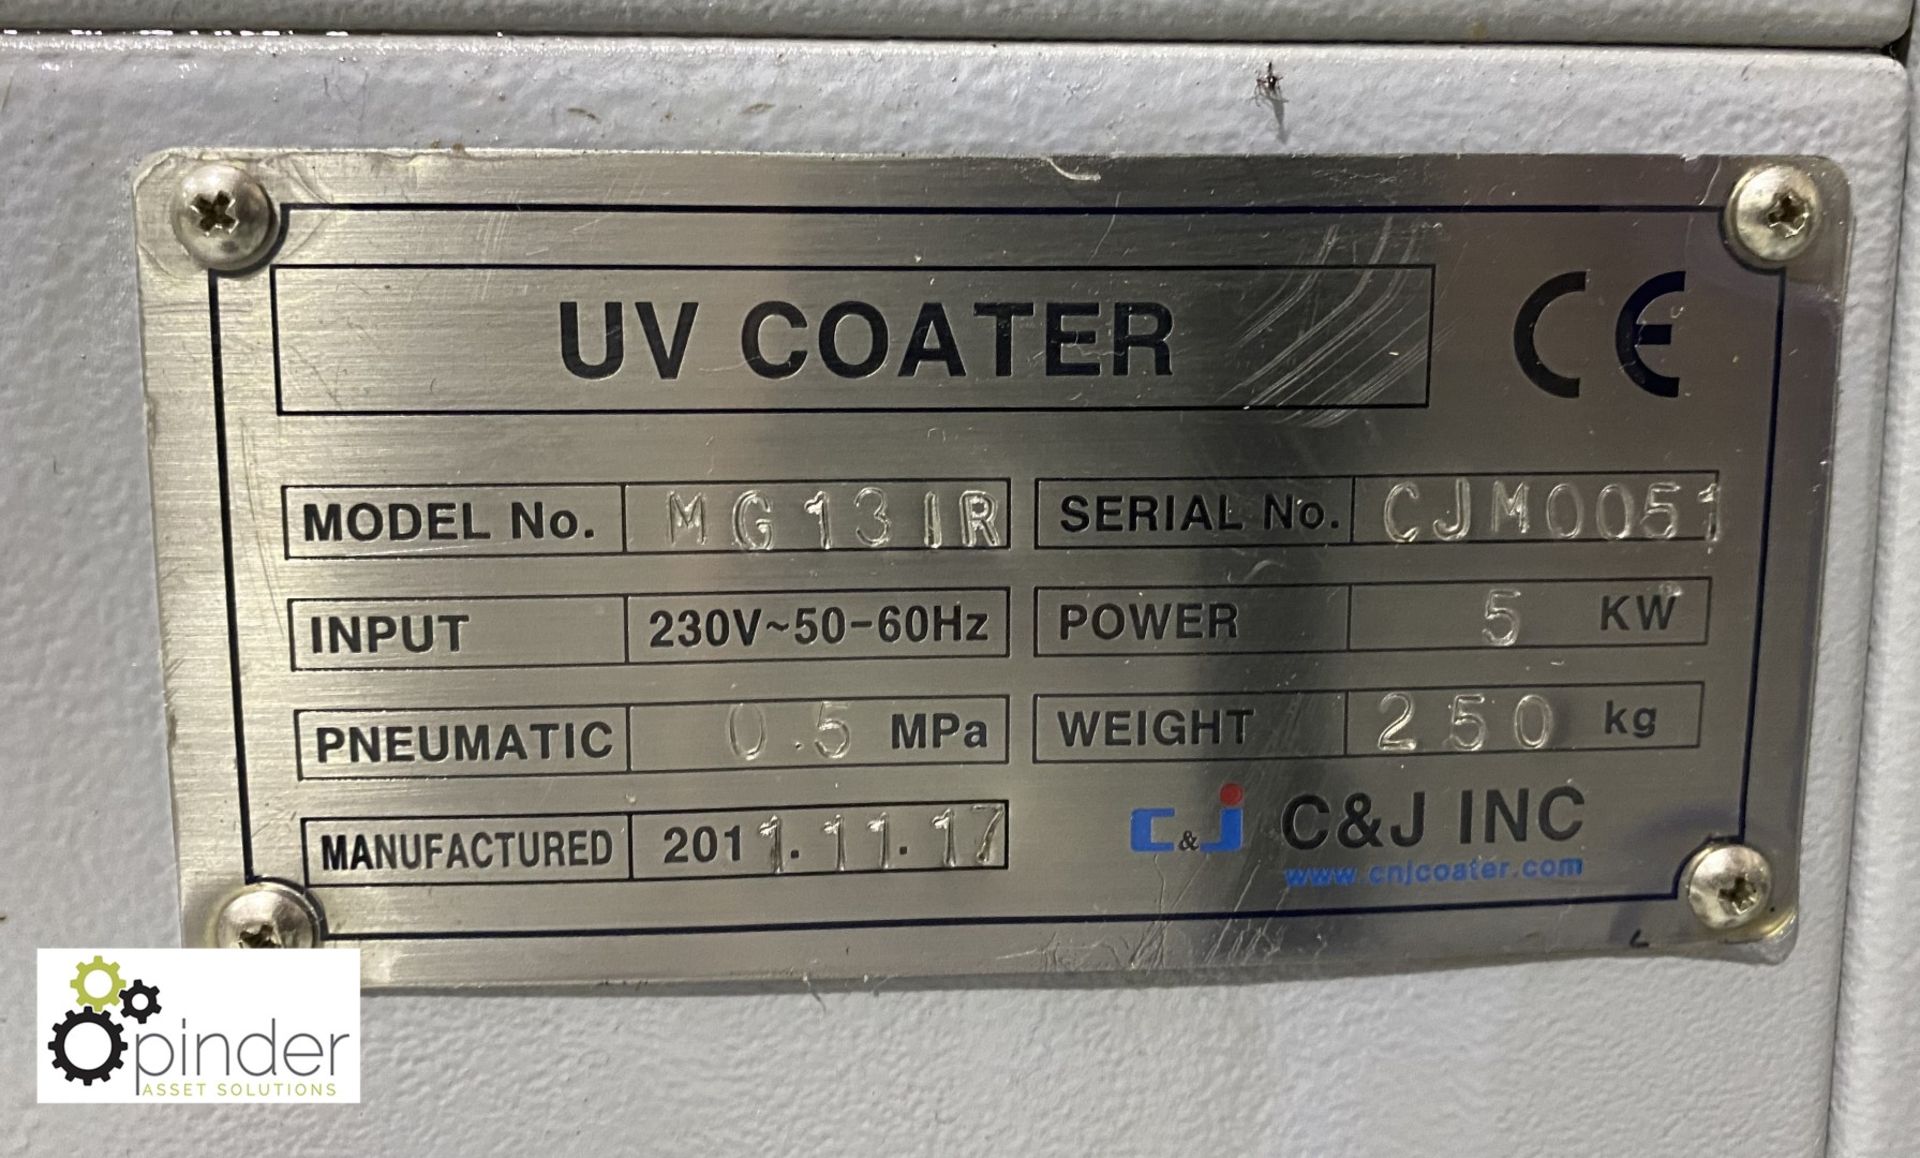 Morgana MG131R Digicoater UV Coater, 240volts, Year 2011 serial number CJM005, with Advantage - Image 8 of 9